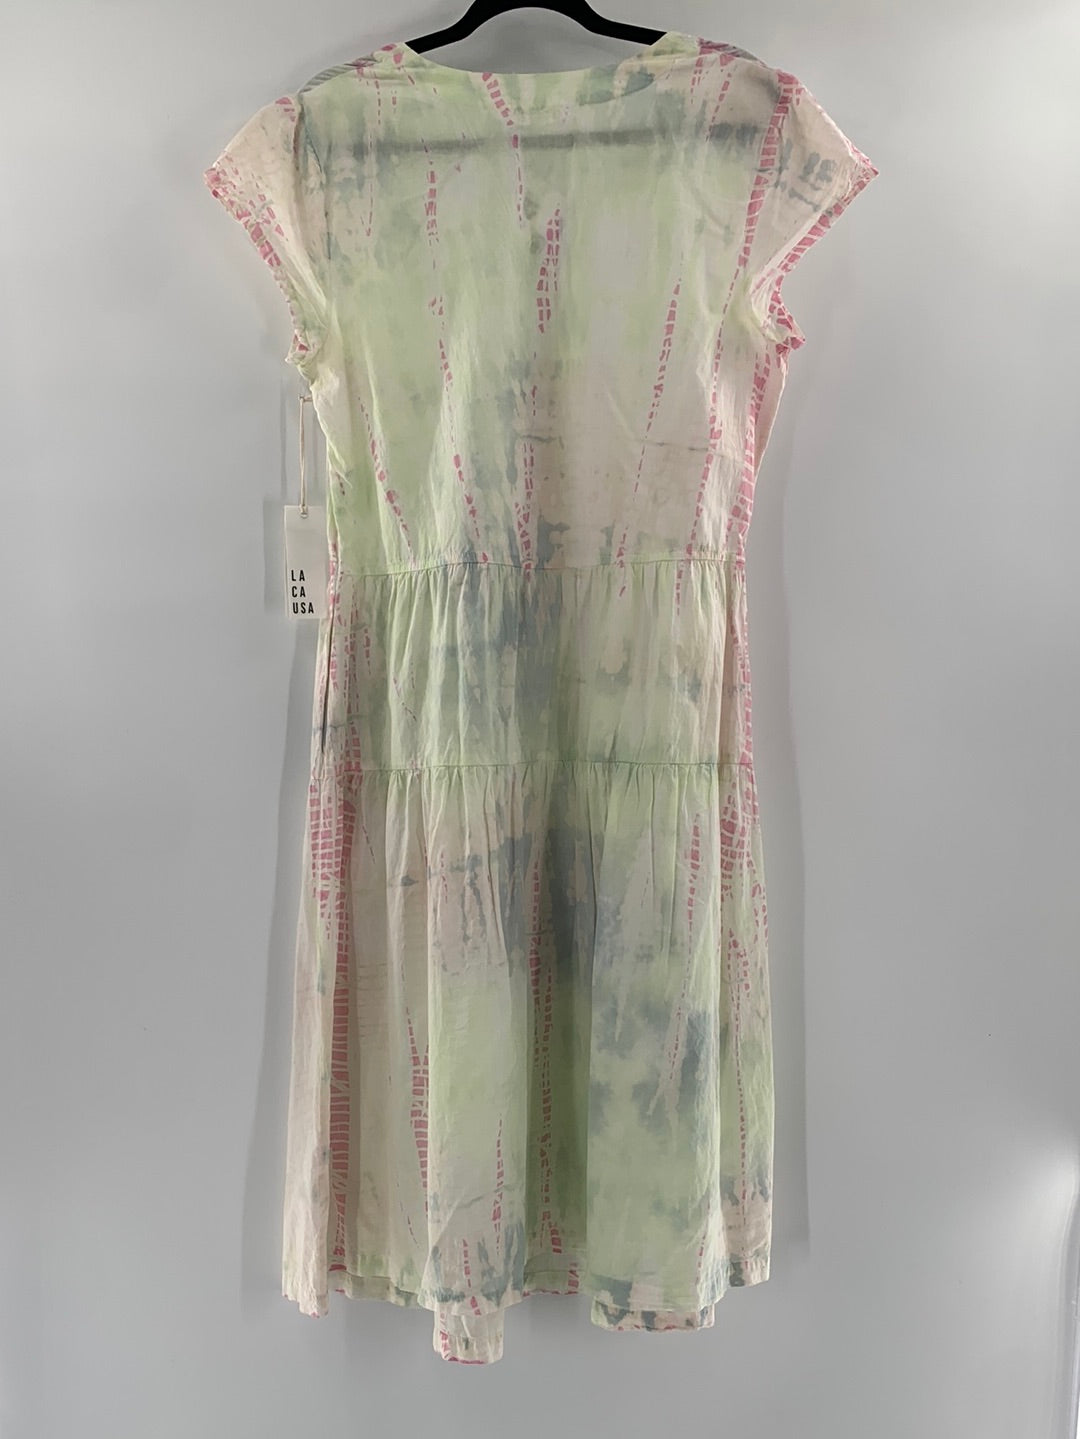 Lá causa - Anthropologie Pastel Tie Dye With Buttons and Ruffle Details Maxi Dress (Size L) - With Tag -